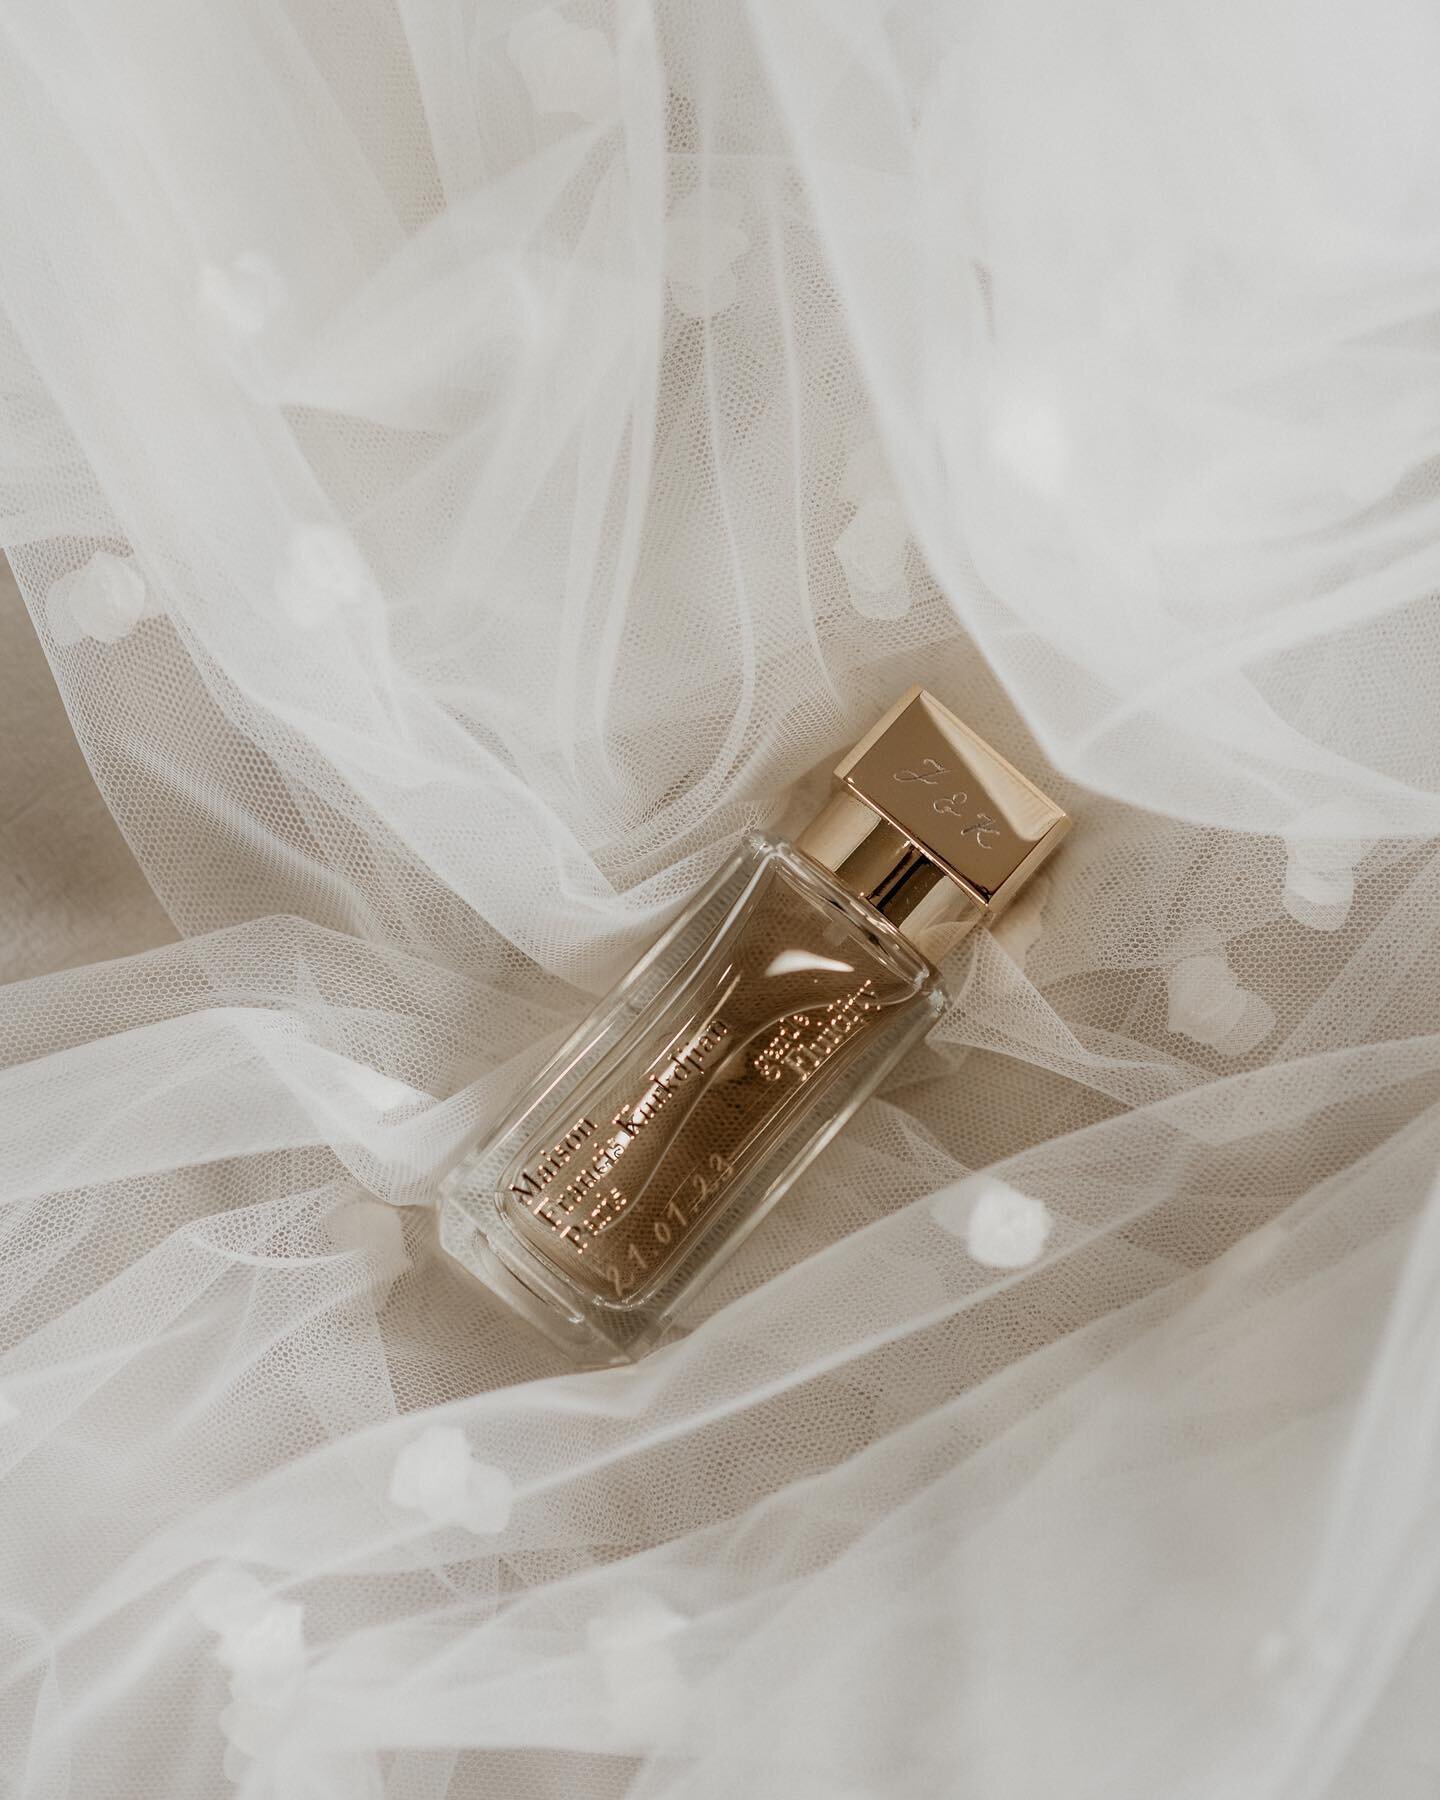 Wedding day scent engraved with the details ✨